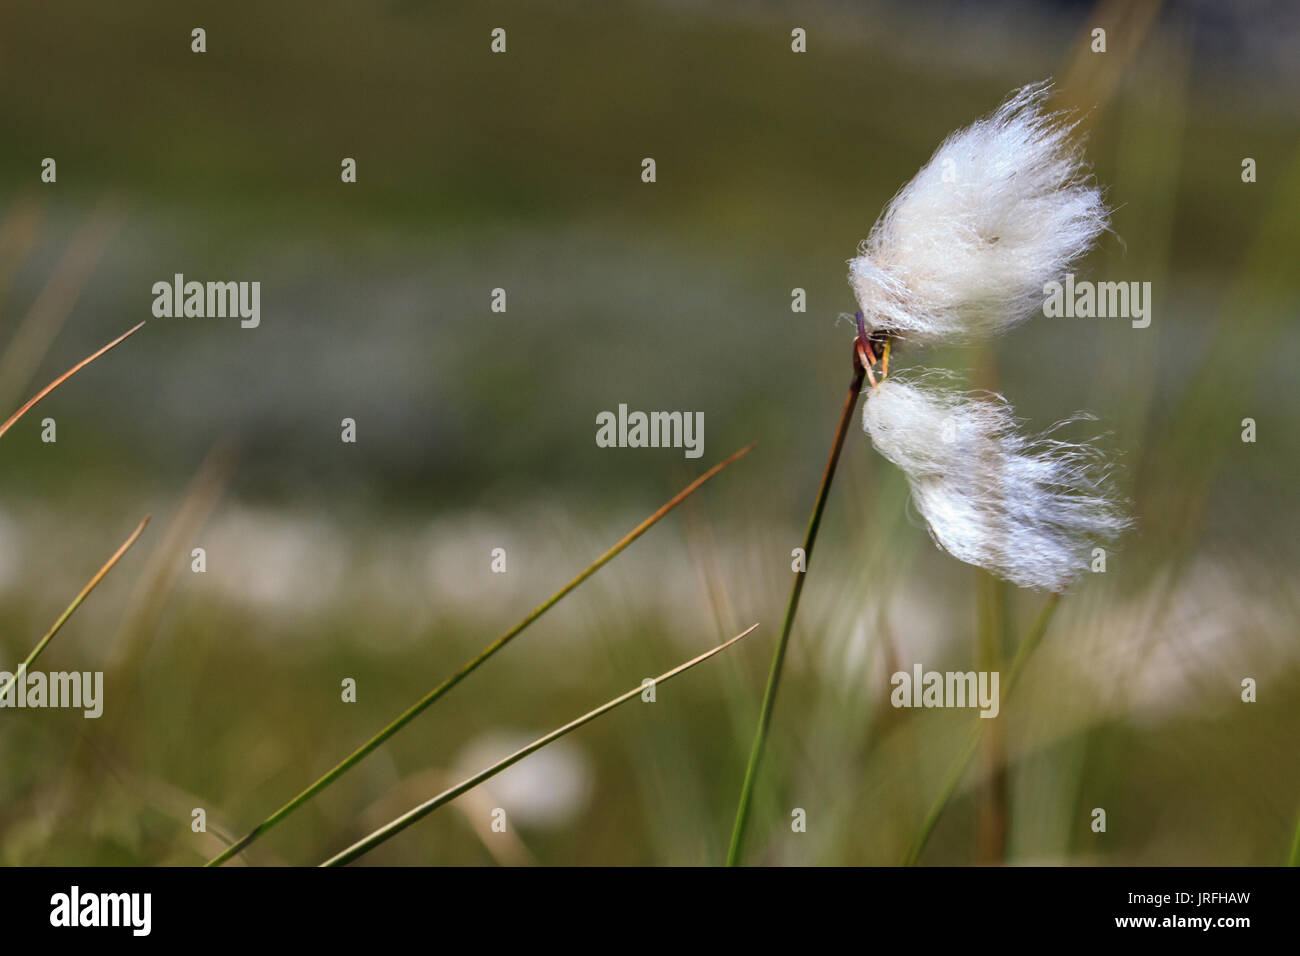 Cottongrass blowing in the wind in Lapland Stock Photo